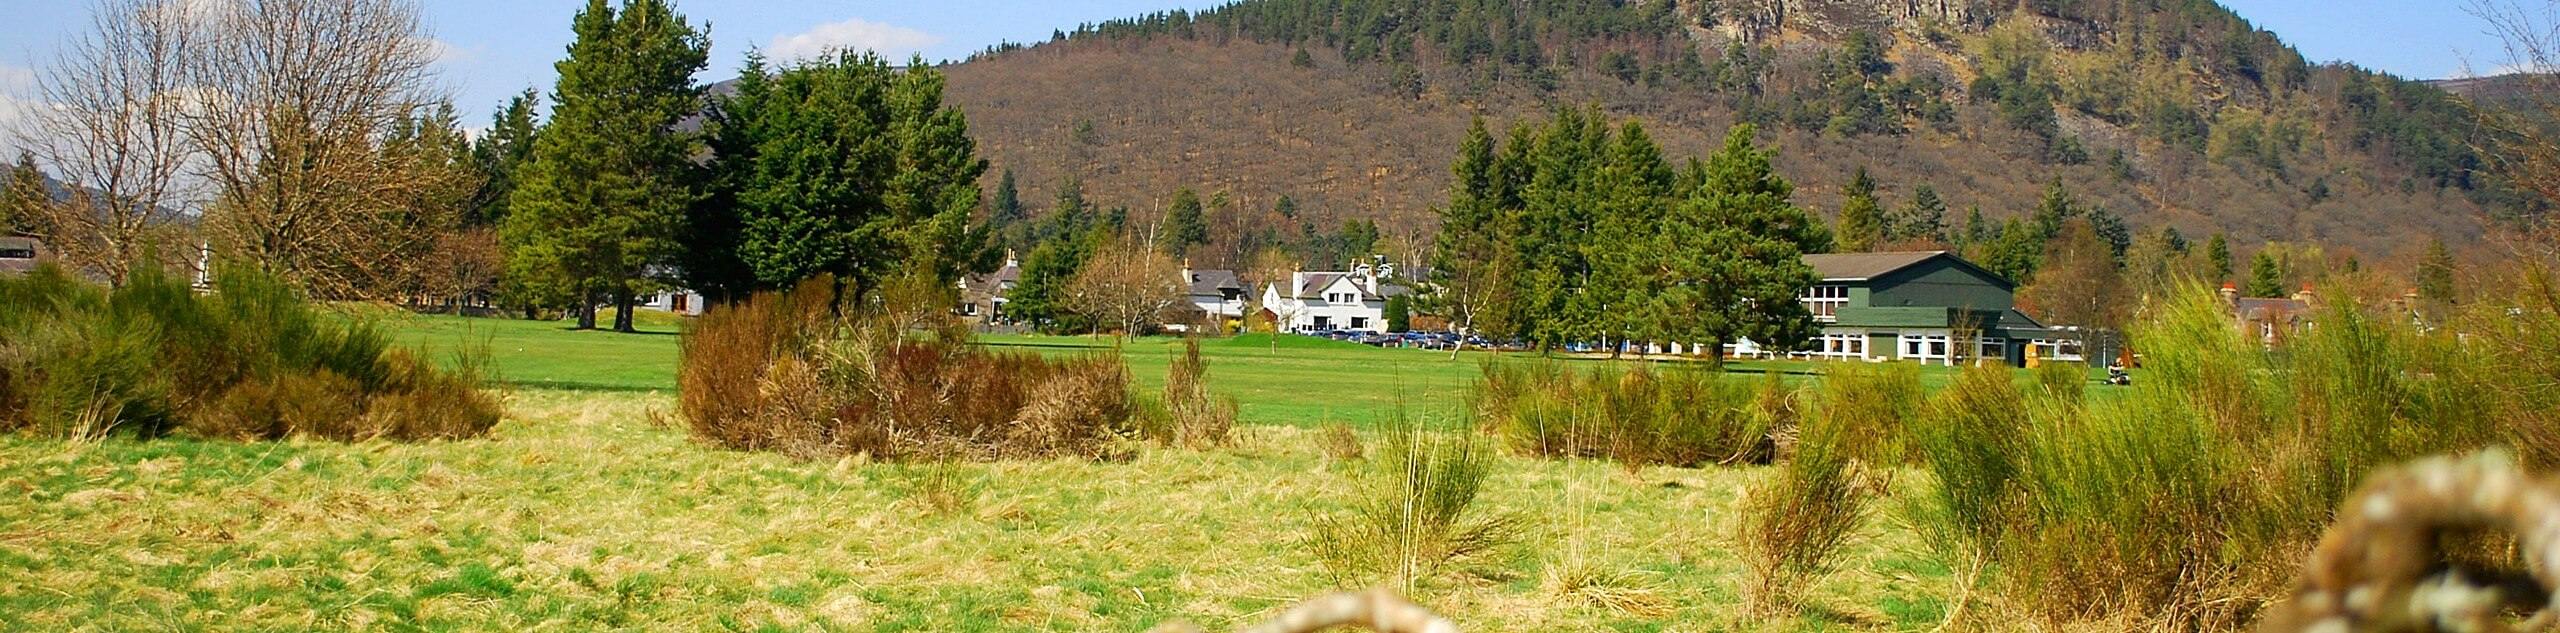 Ballater and Old Railway East Walk